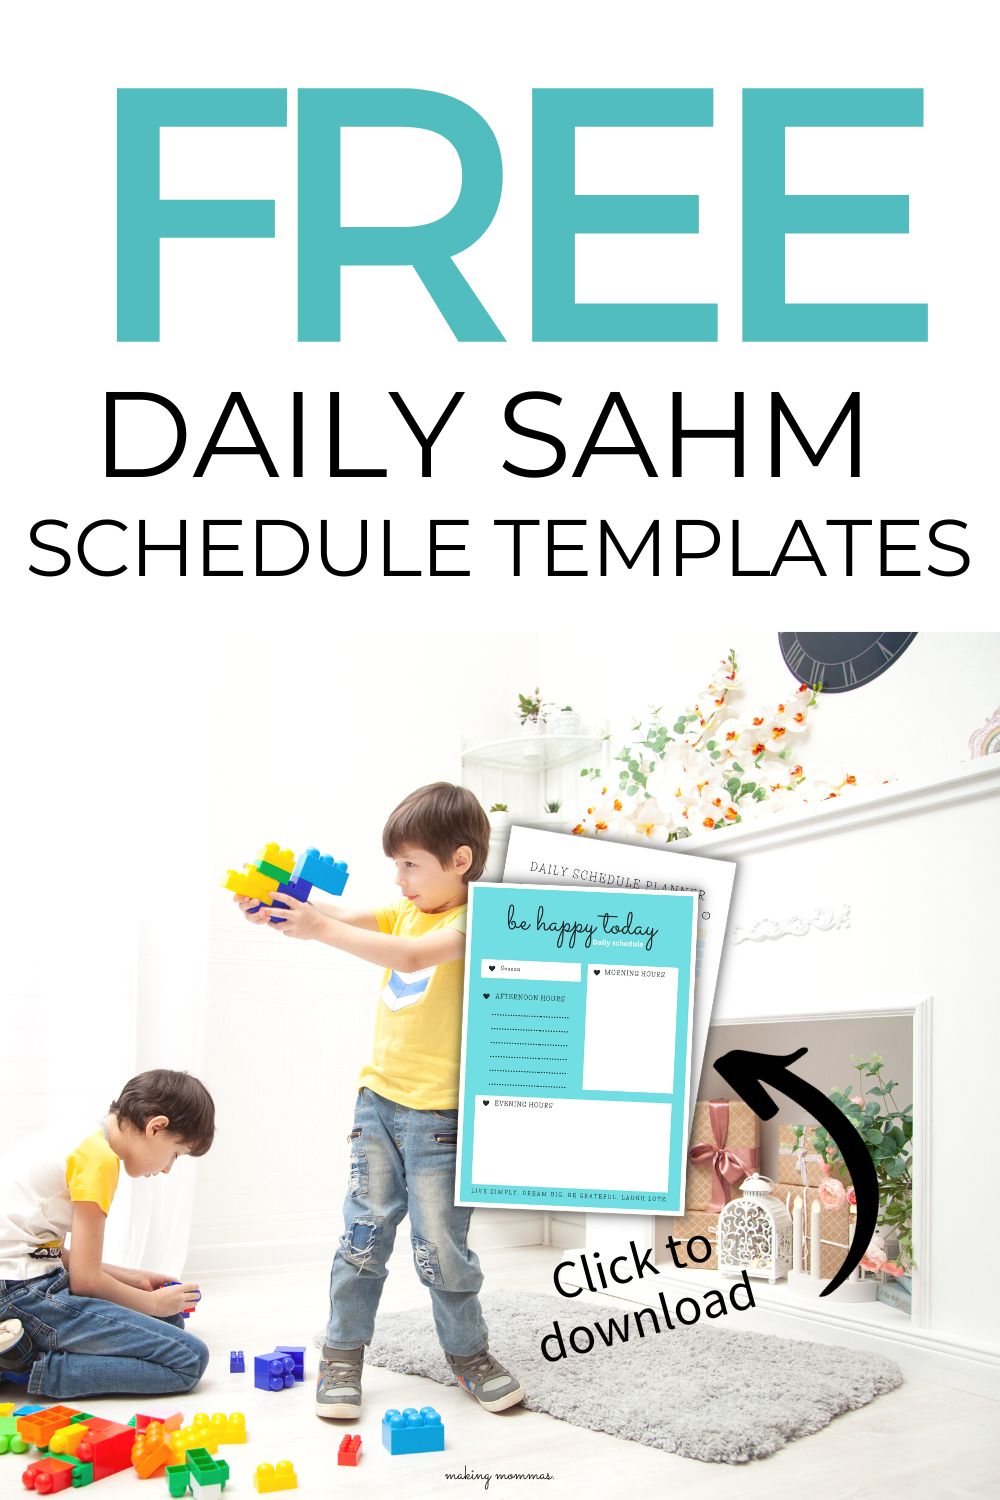 pin image of free daily sahm schedule templates
